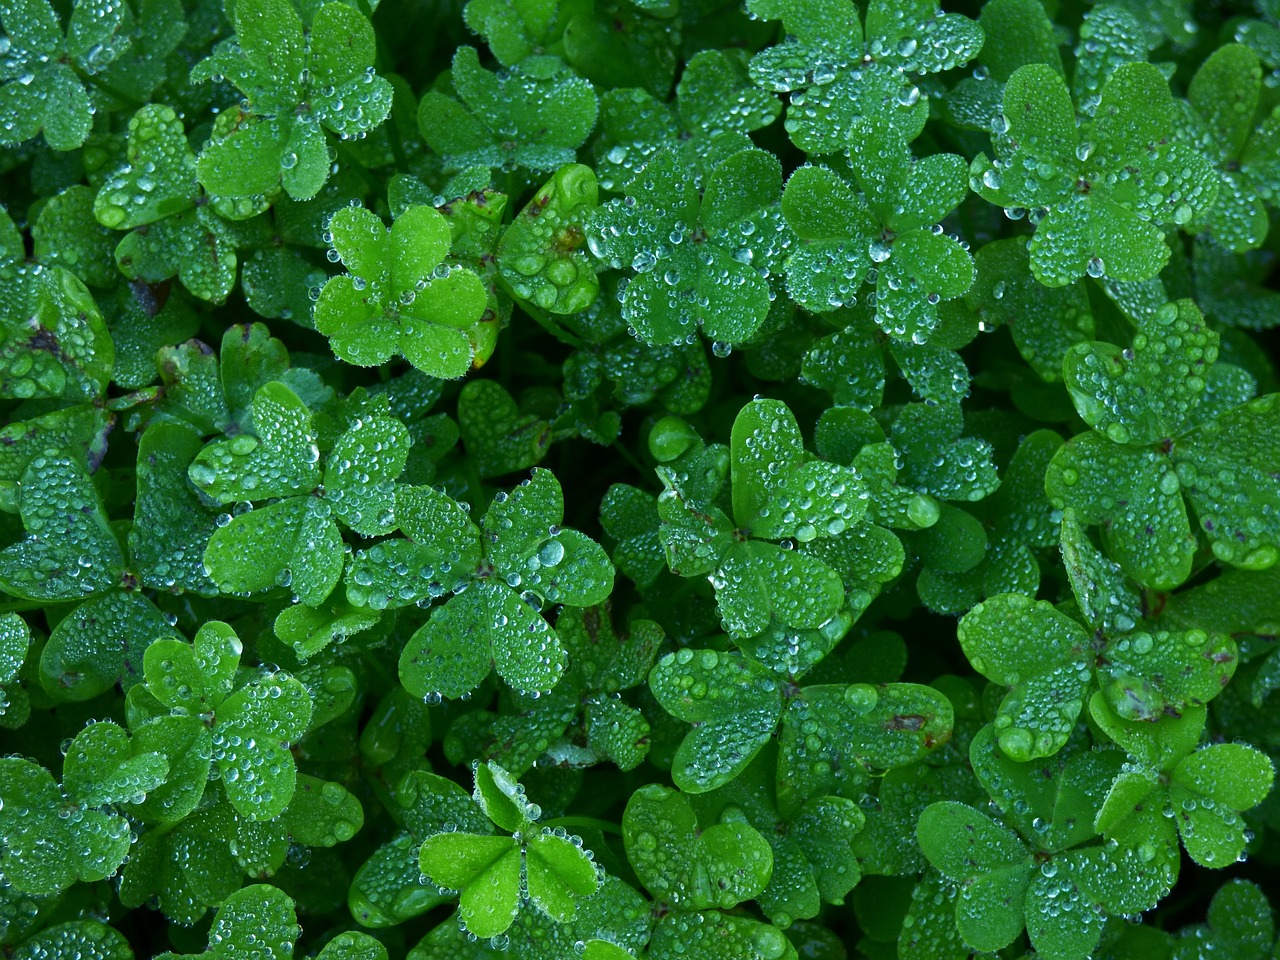 a bunch of green plants with water droplets on them, shutterstock, hurufiyya, background full of lucky clovers, high quality image”